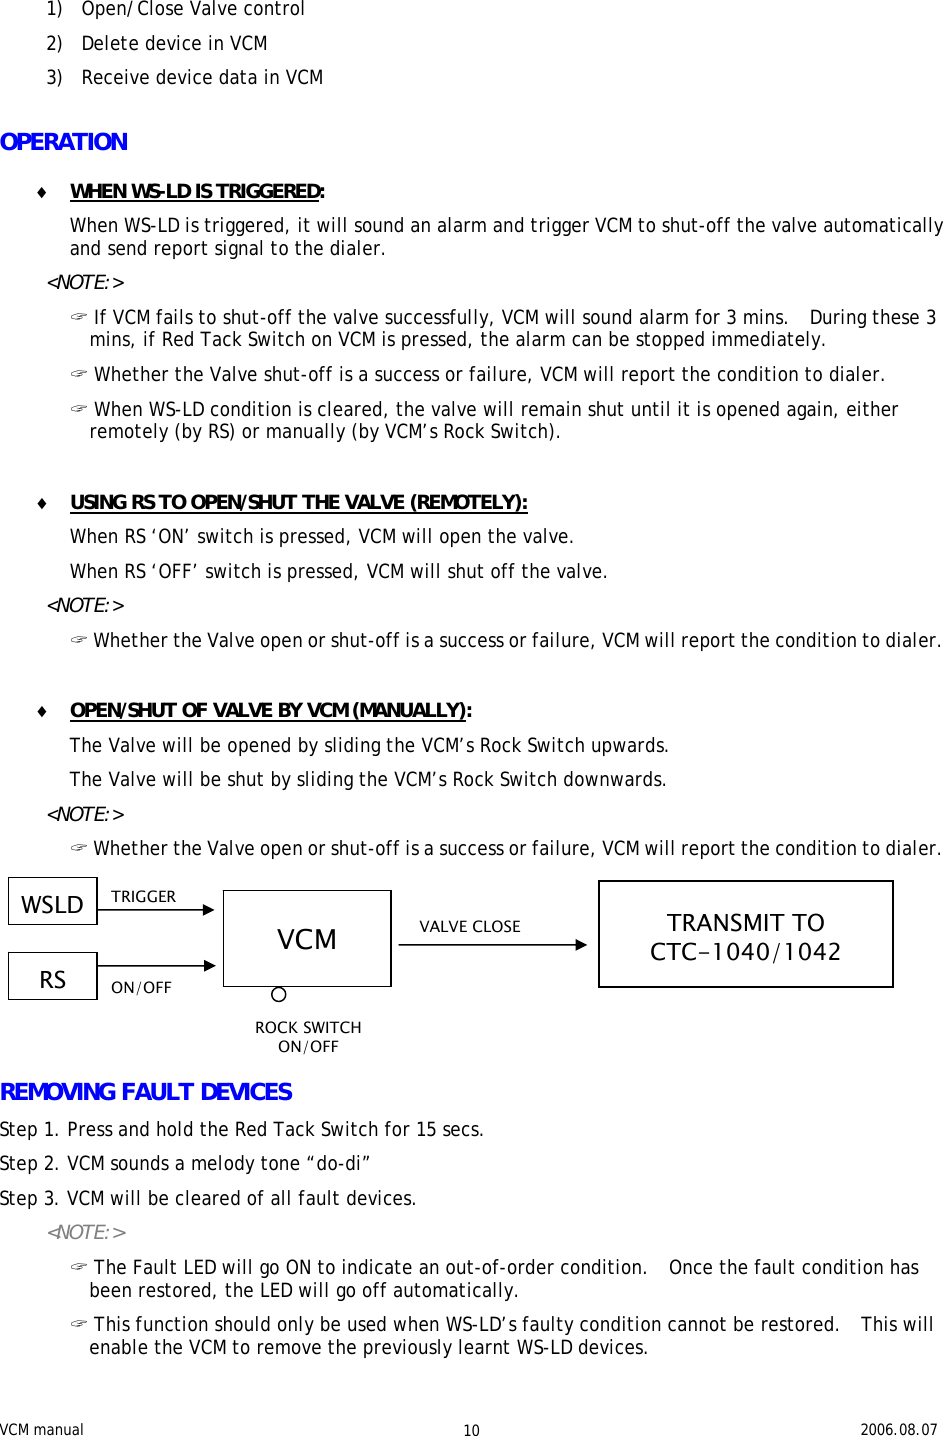 VCM manual                                                                                                   2006.08.07 10 TRIGGER ON/OFF ROCK SWITCH ON/OFF VALVE CLOSE 1) Open/Close Valve control 2) Delete device in VCM 3) Receive device data in VCM  OPERATION  ♦ WHEN WS-LD IS TRIGGERED:   When WS-LD is triggered, it will sound an alarm and trigger VCM to shut-off the valve automatically and send report signal to the dialer.   &lt;NOTE:&gt; &quot; If VCM fails to shut-off the valve successfully, VCM will sound alarm for 3 mins.  During these 3 mins, if Red Tack Switch on VCM is pressed, the alarm can be stopped immediately.  &quot; Whether the Valve shut-off is a success or failure, VCM will report the condition to dialer.  &quot; When WS-LD condition is cleared, the valve will remain shut until it is opened again, either remotely (by RS) or manually (by VCM’s Rock Switch).  ♦ USING RS TO OPEN/SHUT THE VALVE (REMOTELY): When RS ‘ON’ switch is pressed, VCM will open the valve. When RS ‘OFF’ switch is pressed, VCM will shut off the valve.    &lt;NOTE:&gt; &quot; Whether the Valve open or shut-off is a success or failure, VCM will report the condition to dialer.  ♦ OPEN/SHUT OF VALVE BY VCM (MANUALLY): The Valve will be opened by sliding the VCM’s Rock Switch upwards. The Valve will be shut by sliding the VCM’s Rock Switch downwards.  &lt;NOTE:&gt; &quot; Whether the Valve open or shut-off is a success or failure, VCM will report the condition to dialer.       REMOVING FAULT DEVICES Step 1. Press and hold the Red Tack Switch for 15 secs.  Step 2. VCM sounds a melody tone “do-di” Step 3. VCM will be cleared of all fault devices.  &lt;NOTE:&gt; &quot; The Fault LED will go ON to indicate an out-of-order condition.  Once the fault condition has been restored, the LED will go off automatically.  &quot; This function should only be used when WS-LD’s faulty condition cannot be restored.  This will enable the VCM to remove the previously learnt WS-LD devices.  WSLD RS VCM  TRANSMIT TO CTC-1040/1042 